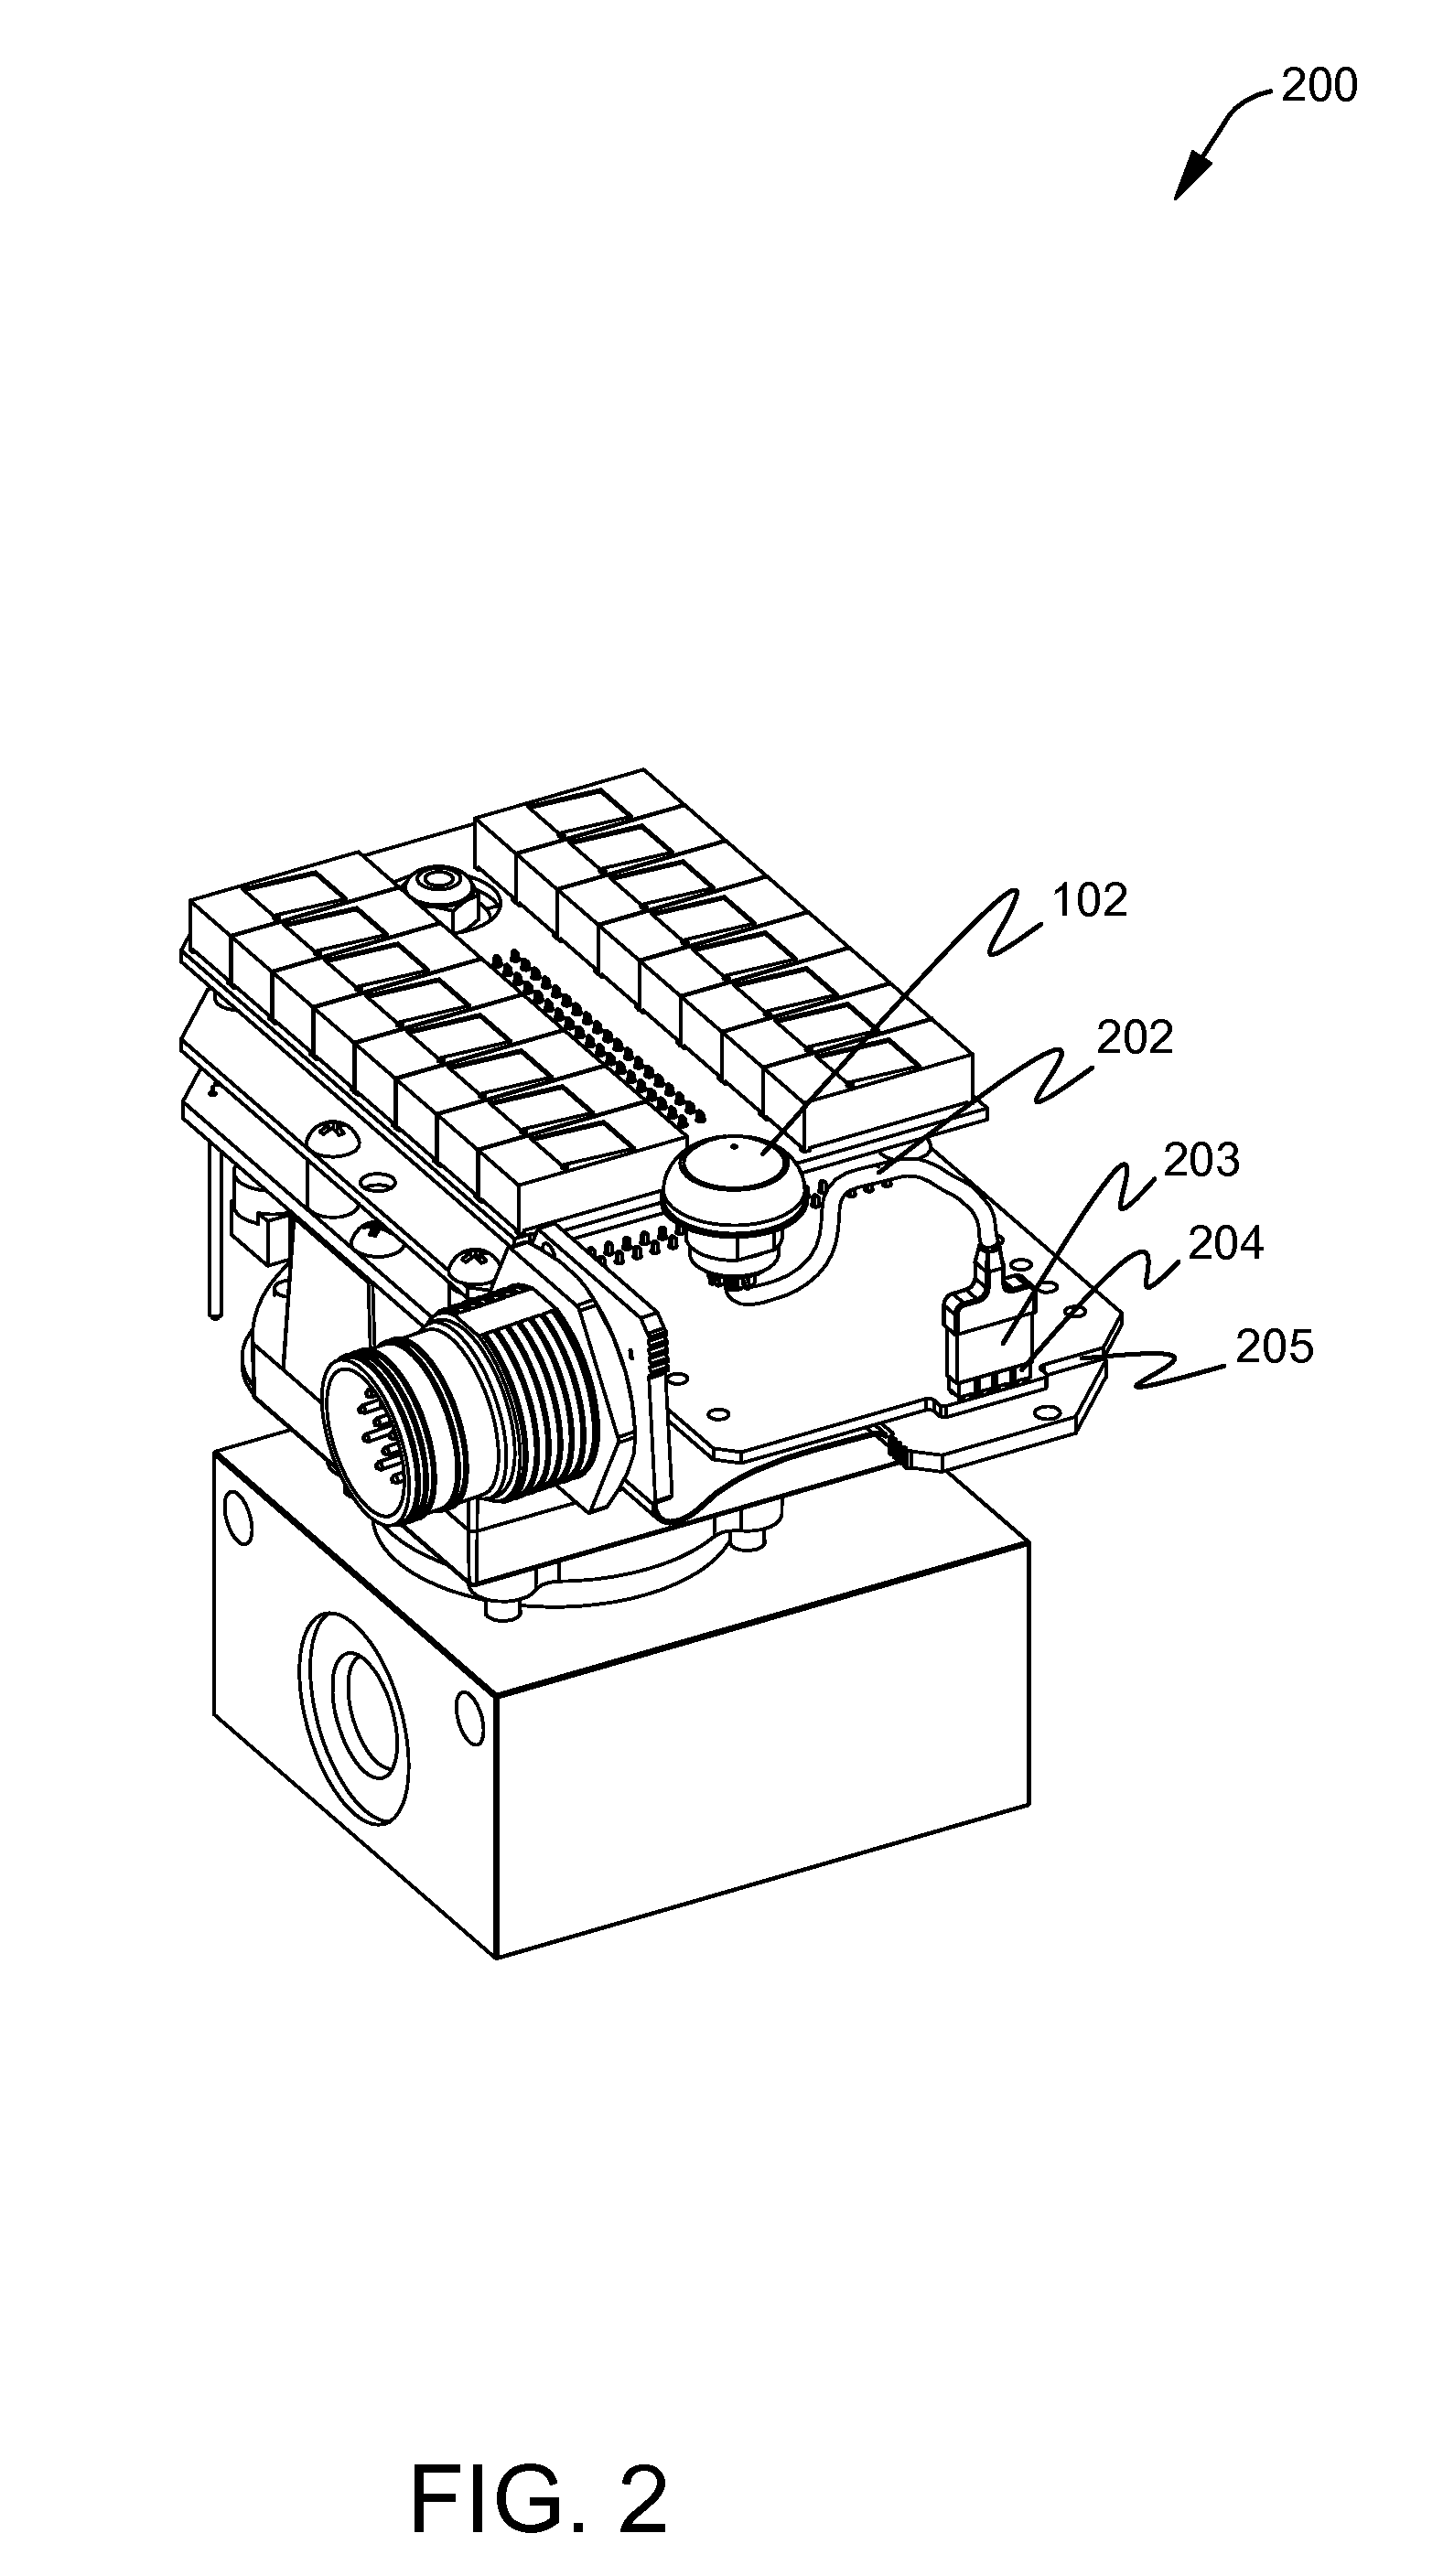 Network manageable advanced gas sensor apparatus and method